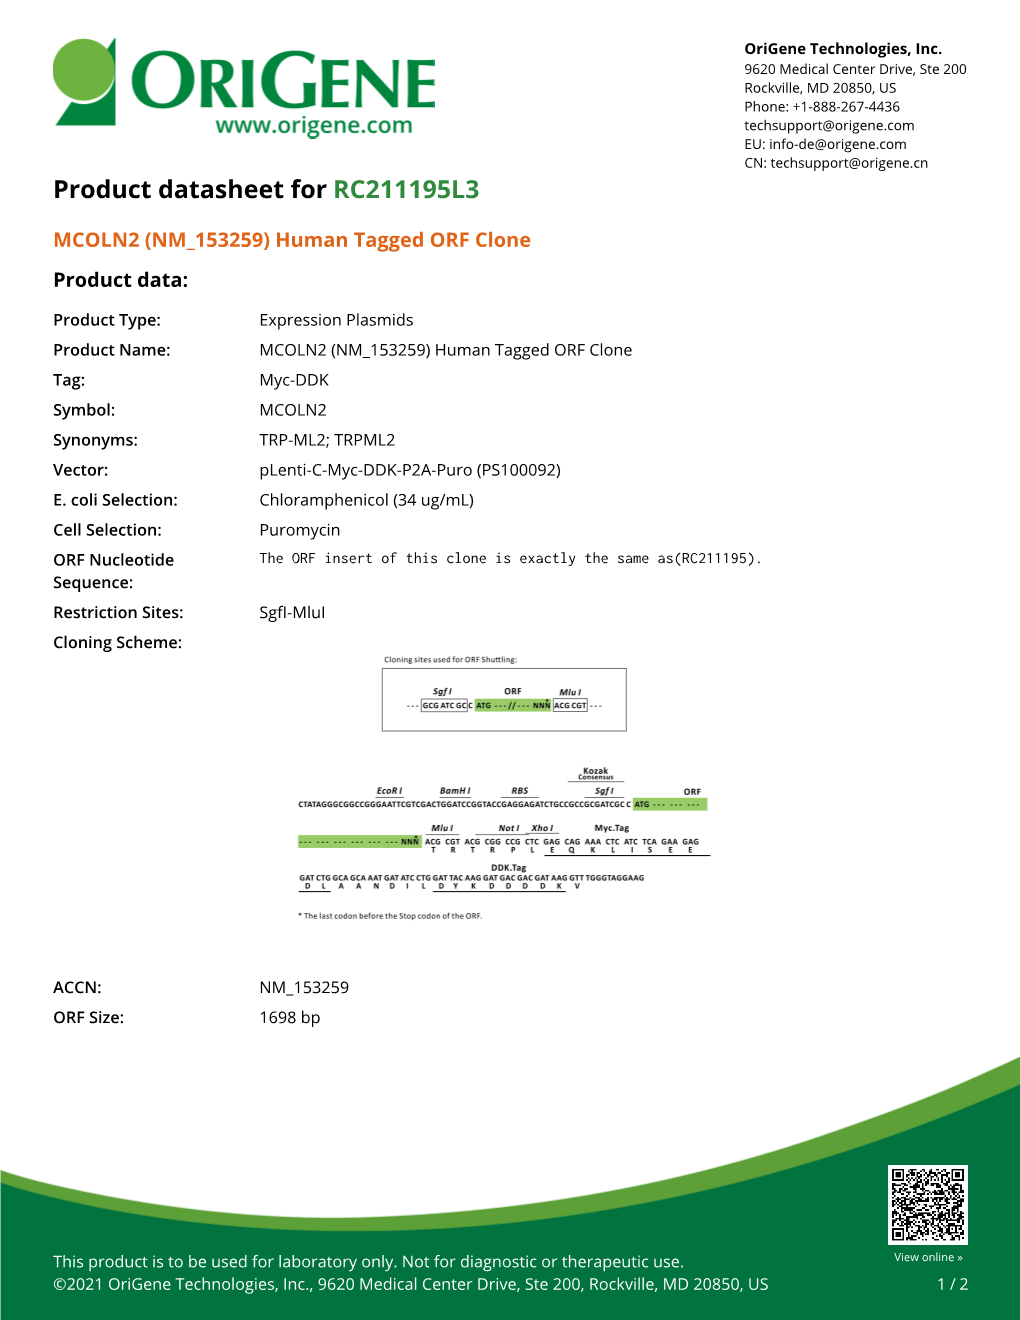 MCOLN2 (NM 153259) Human Tagged ORF Clone Product Data